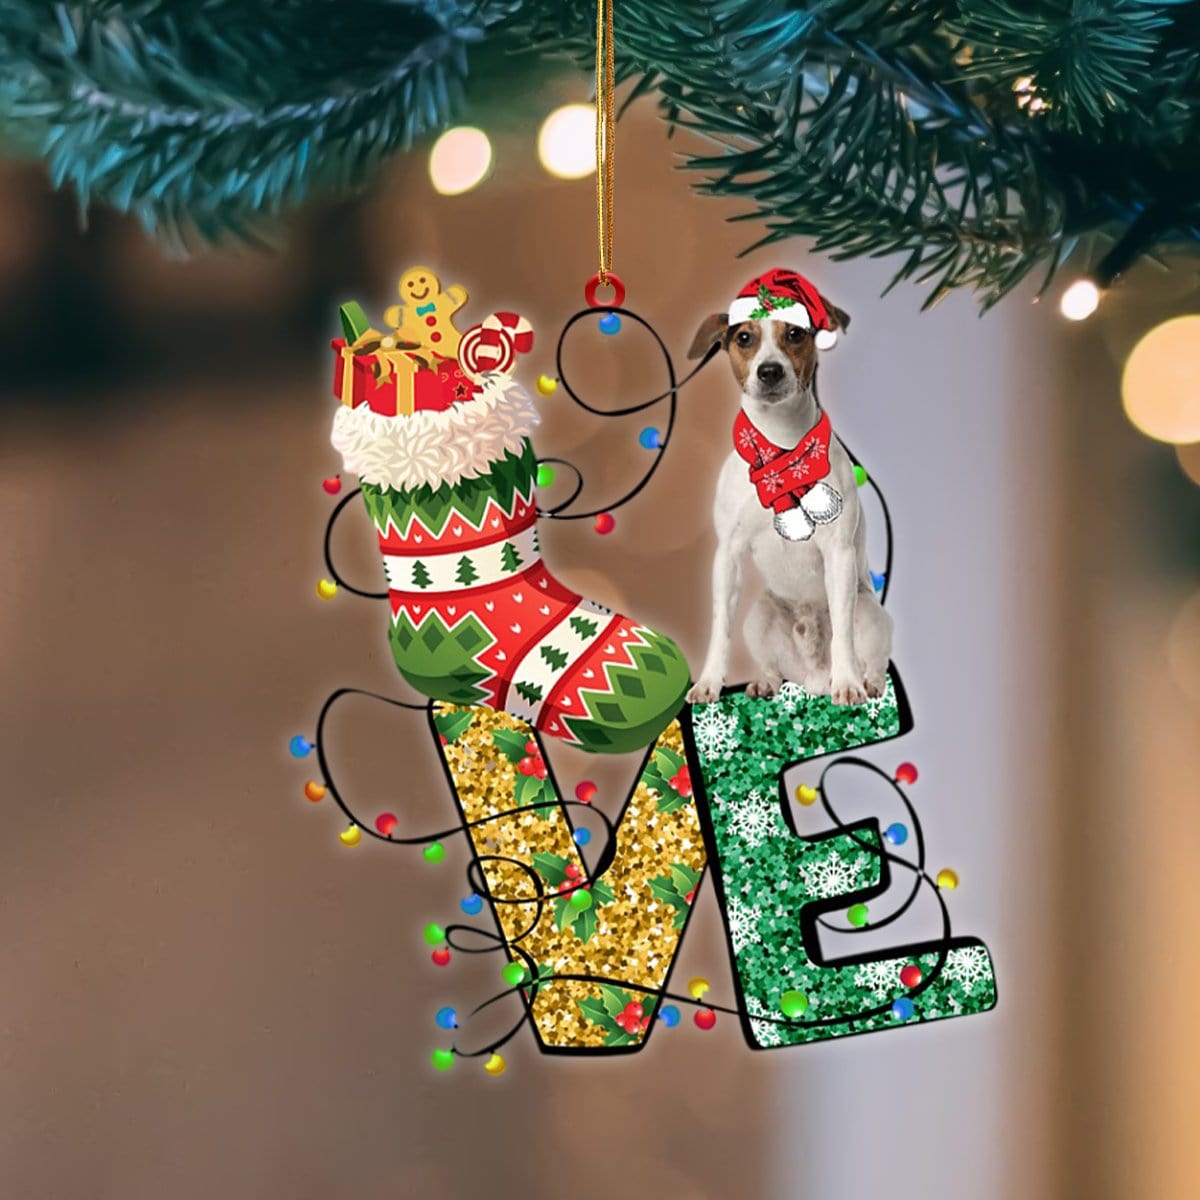 Jack Russell Terrier LOVE Stocking Merry Christmas Hanging Ornament